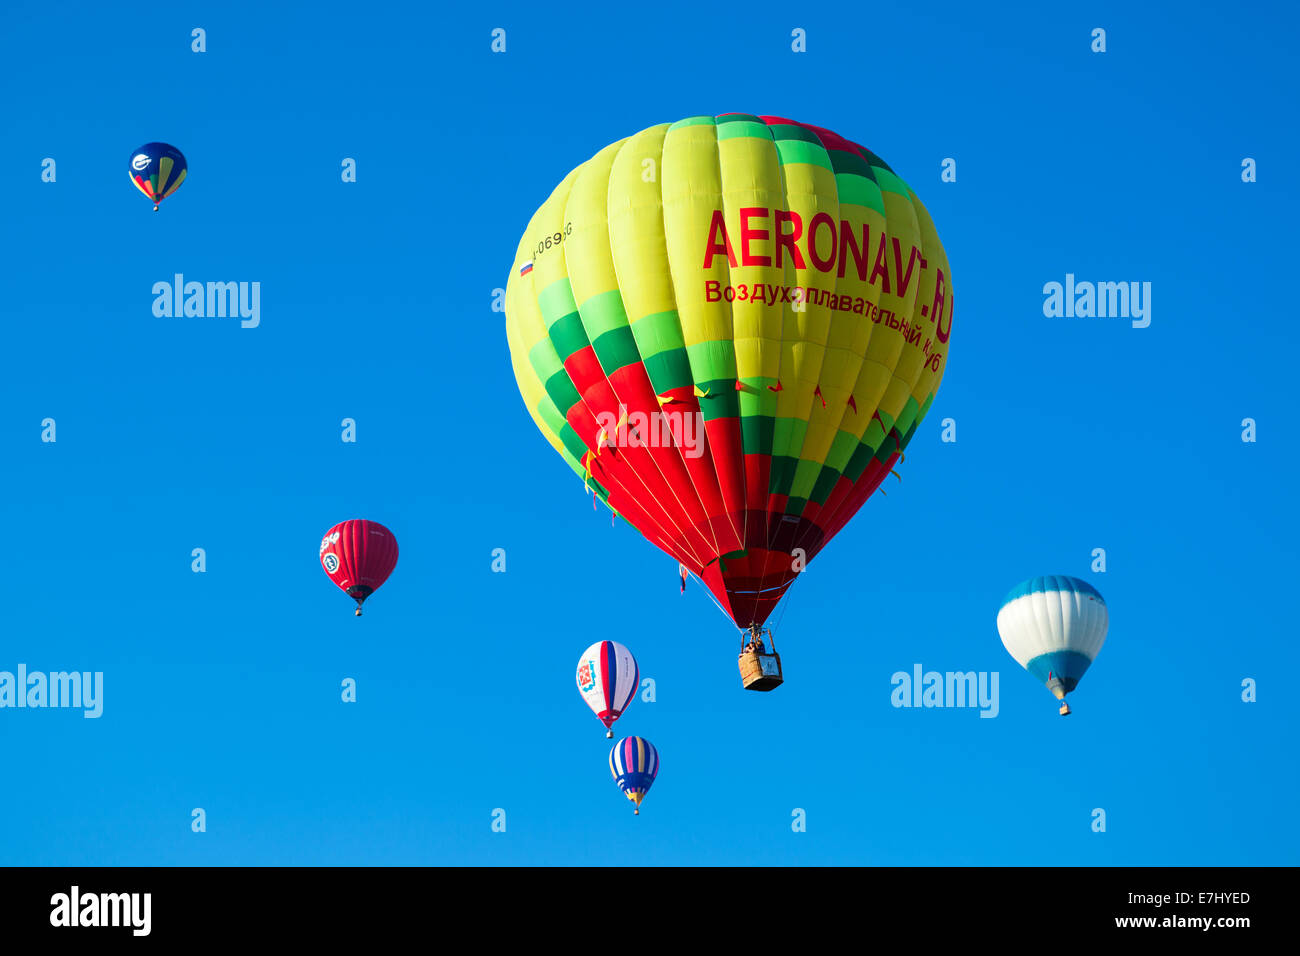 Minsk, Belarus - September 13, 2014: The FIRST OPEN CHAMPIONSHIP of Belarus on aeronautic sports.Bunch of colored balloons. Stock Photo